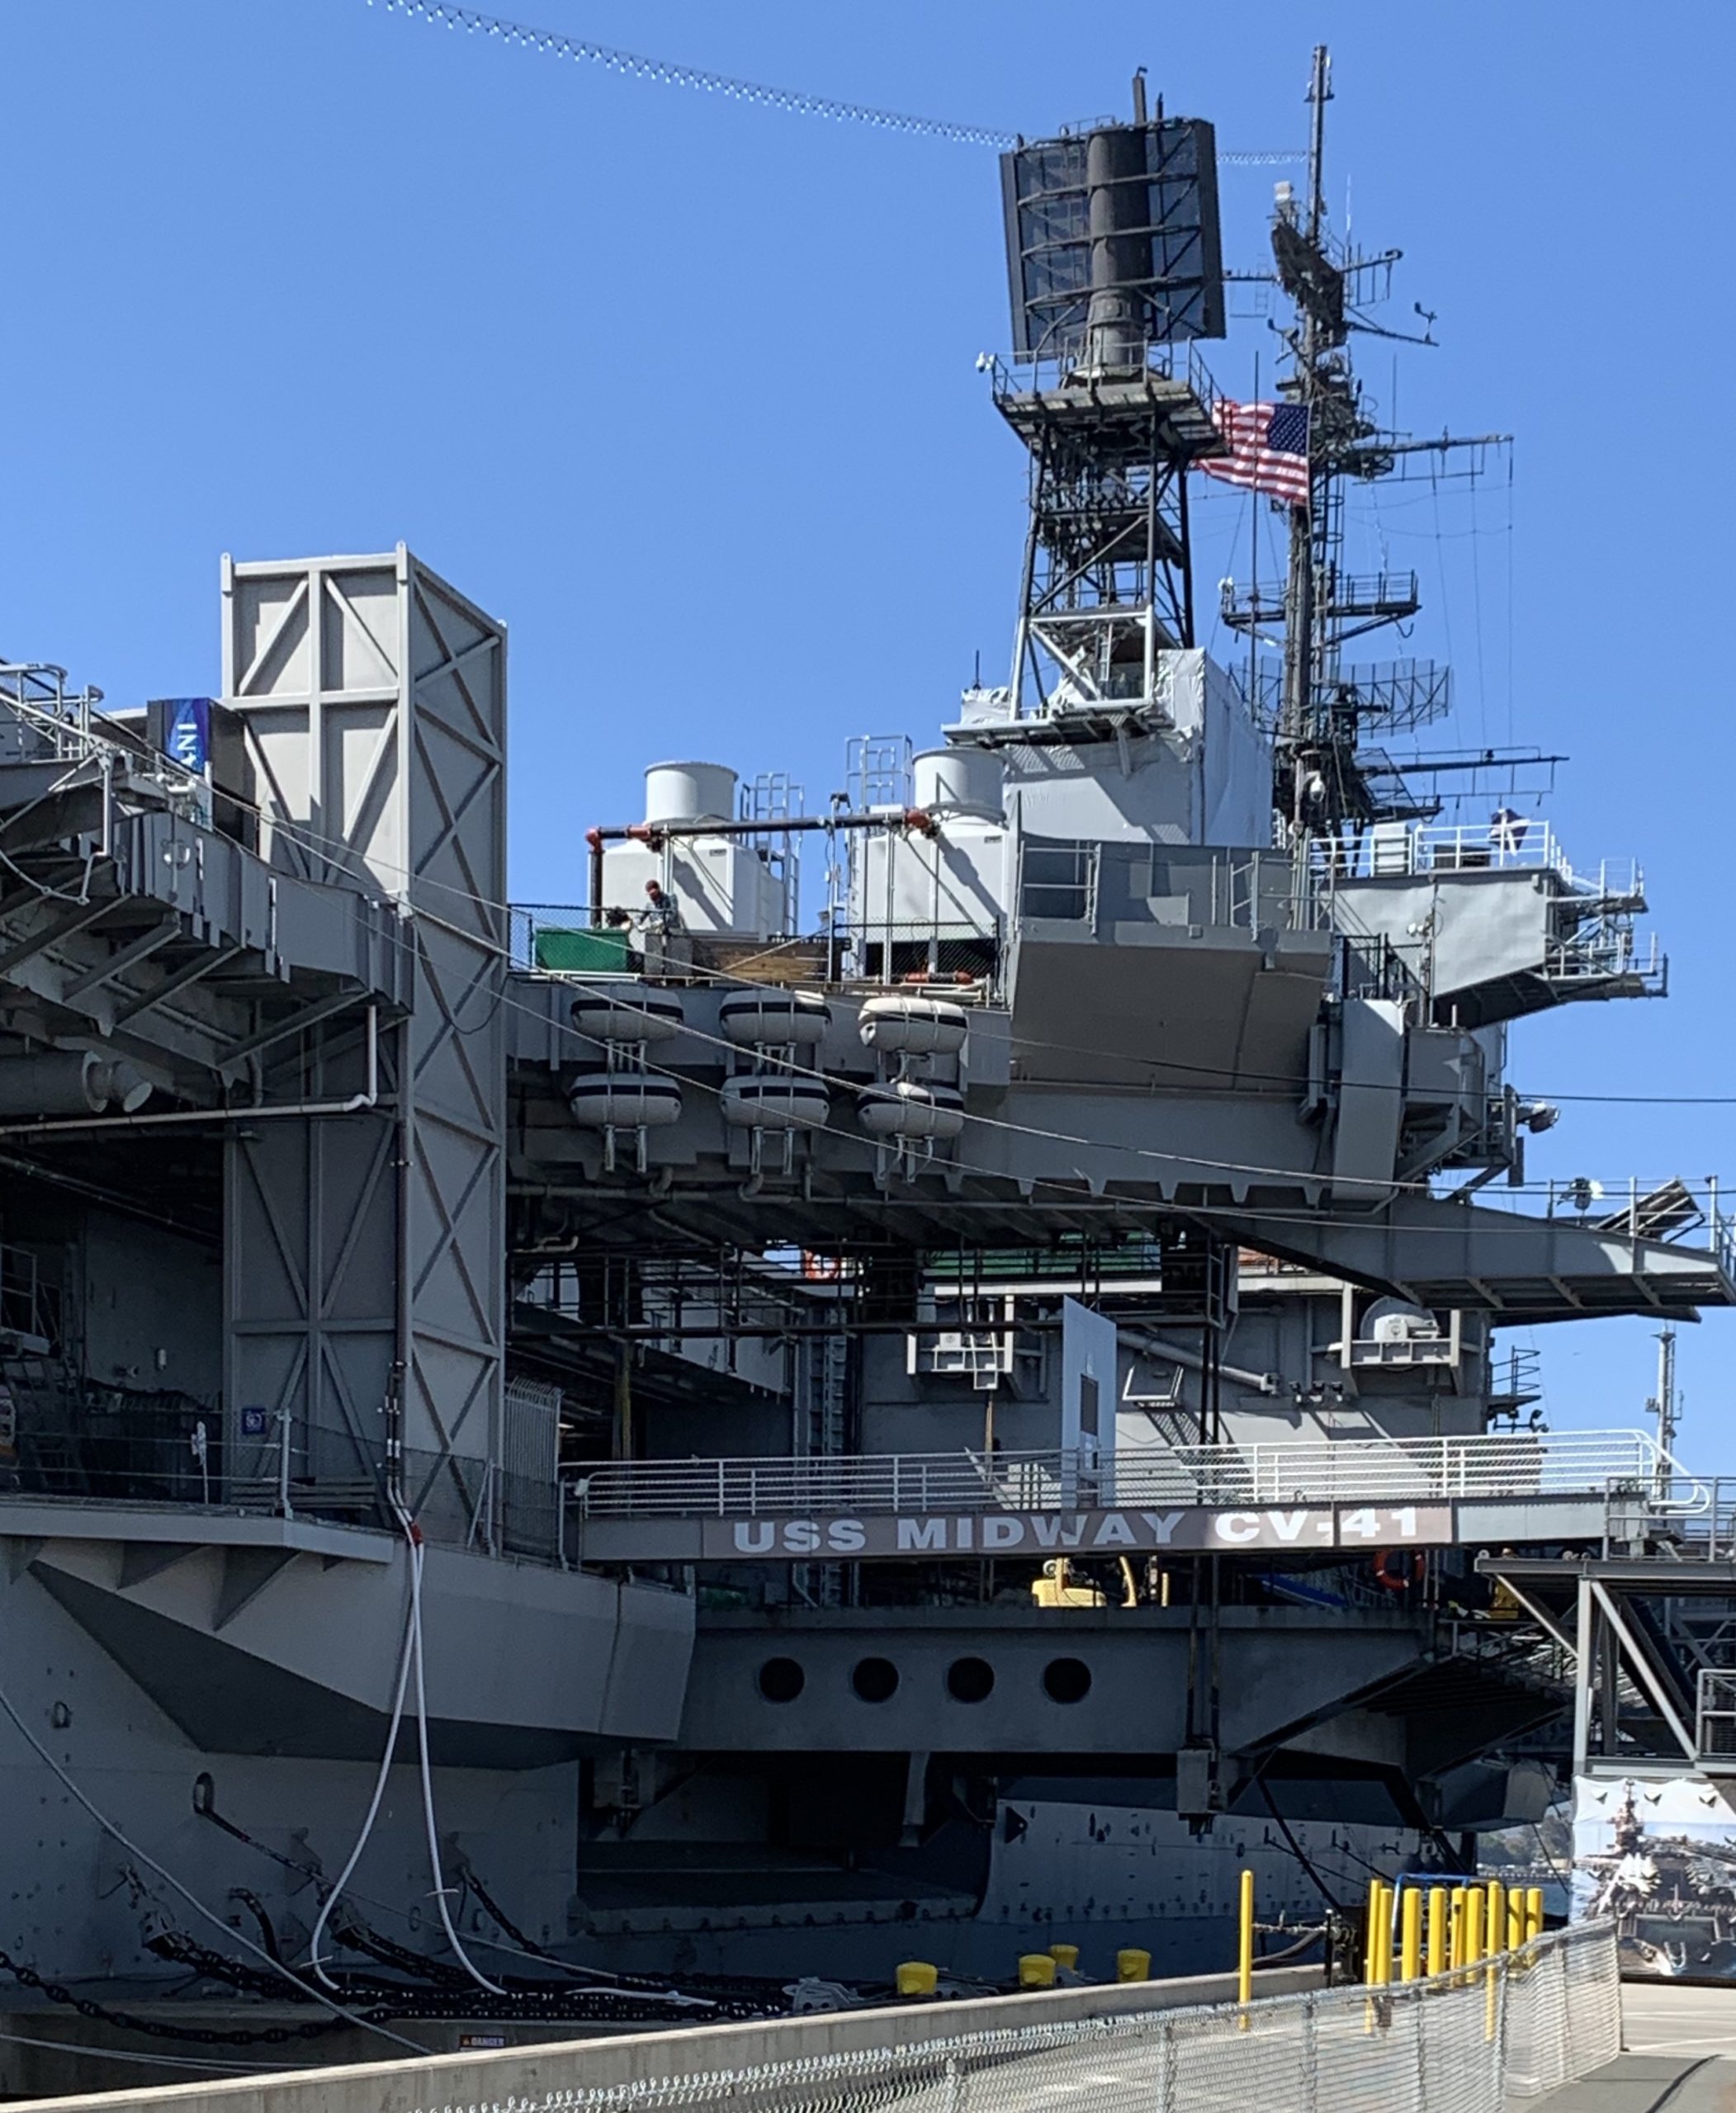 My USS Midway Museum Moment